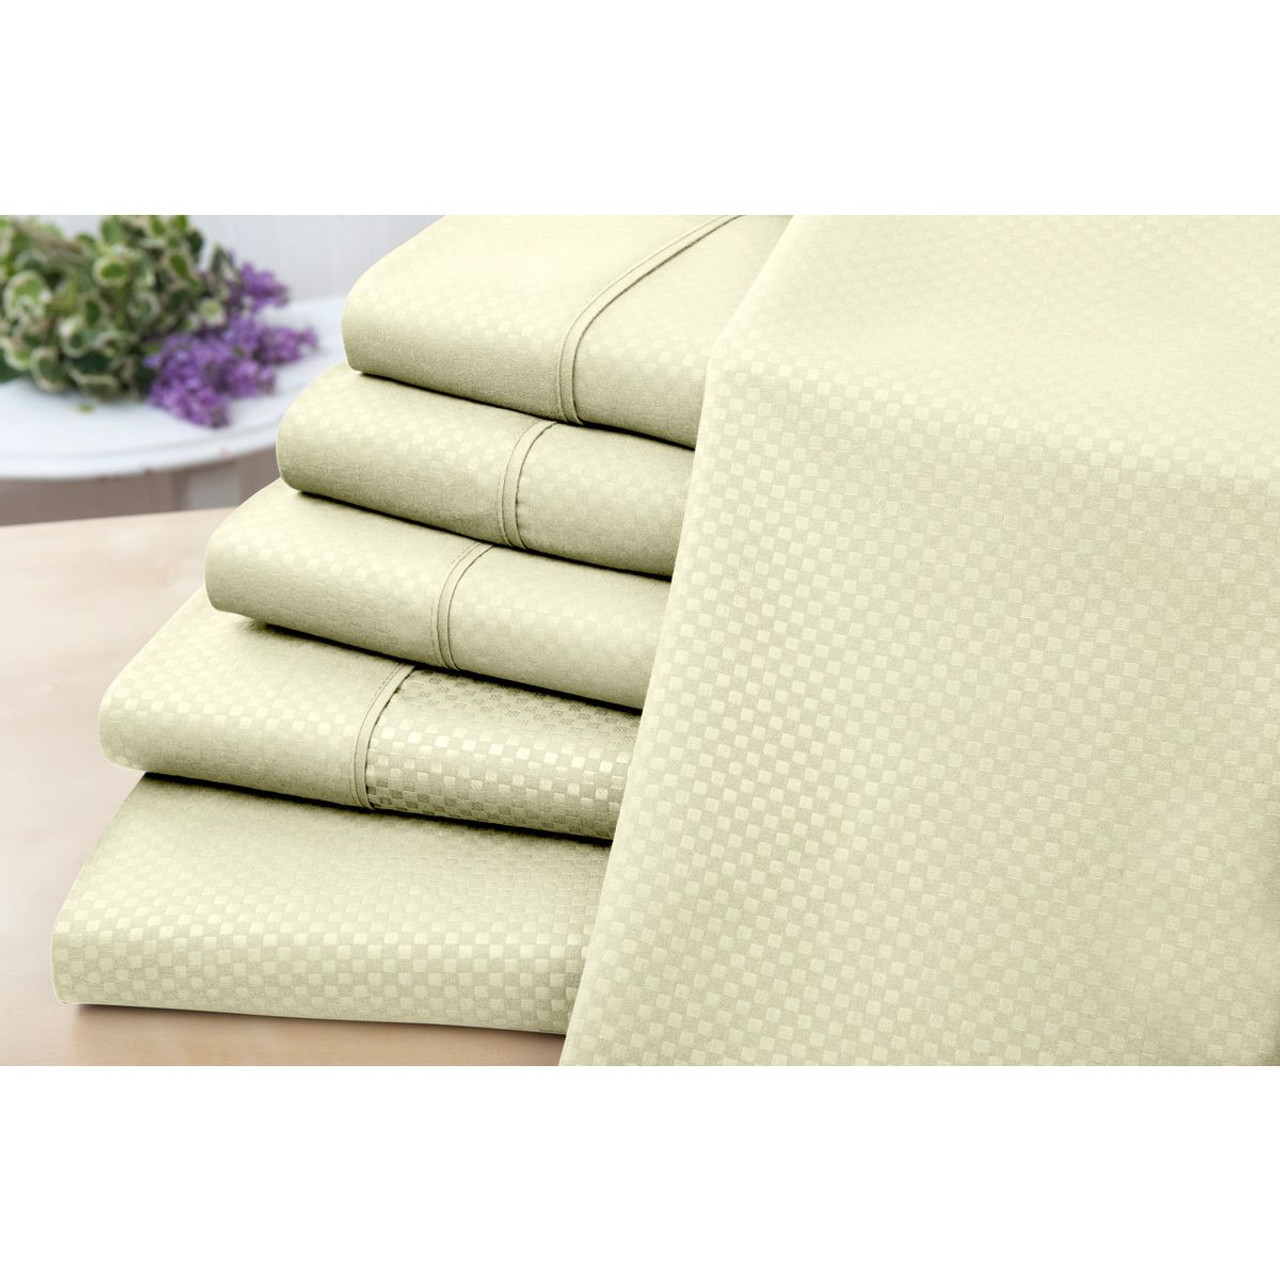 6-Piece Embossed Checkered Sheet Set product image